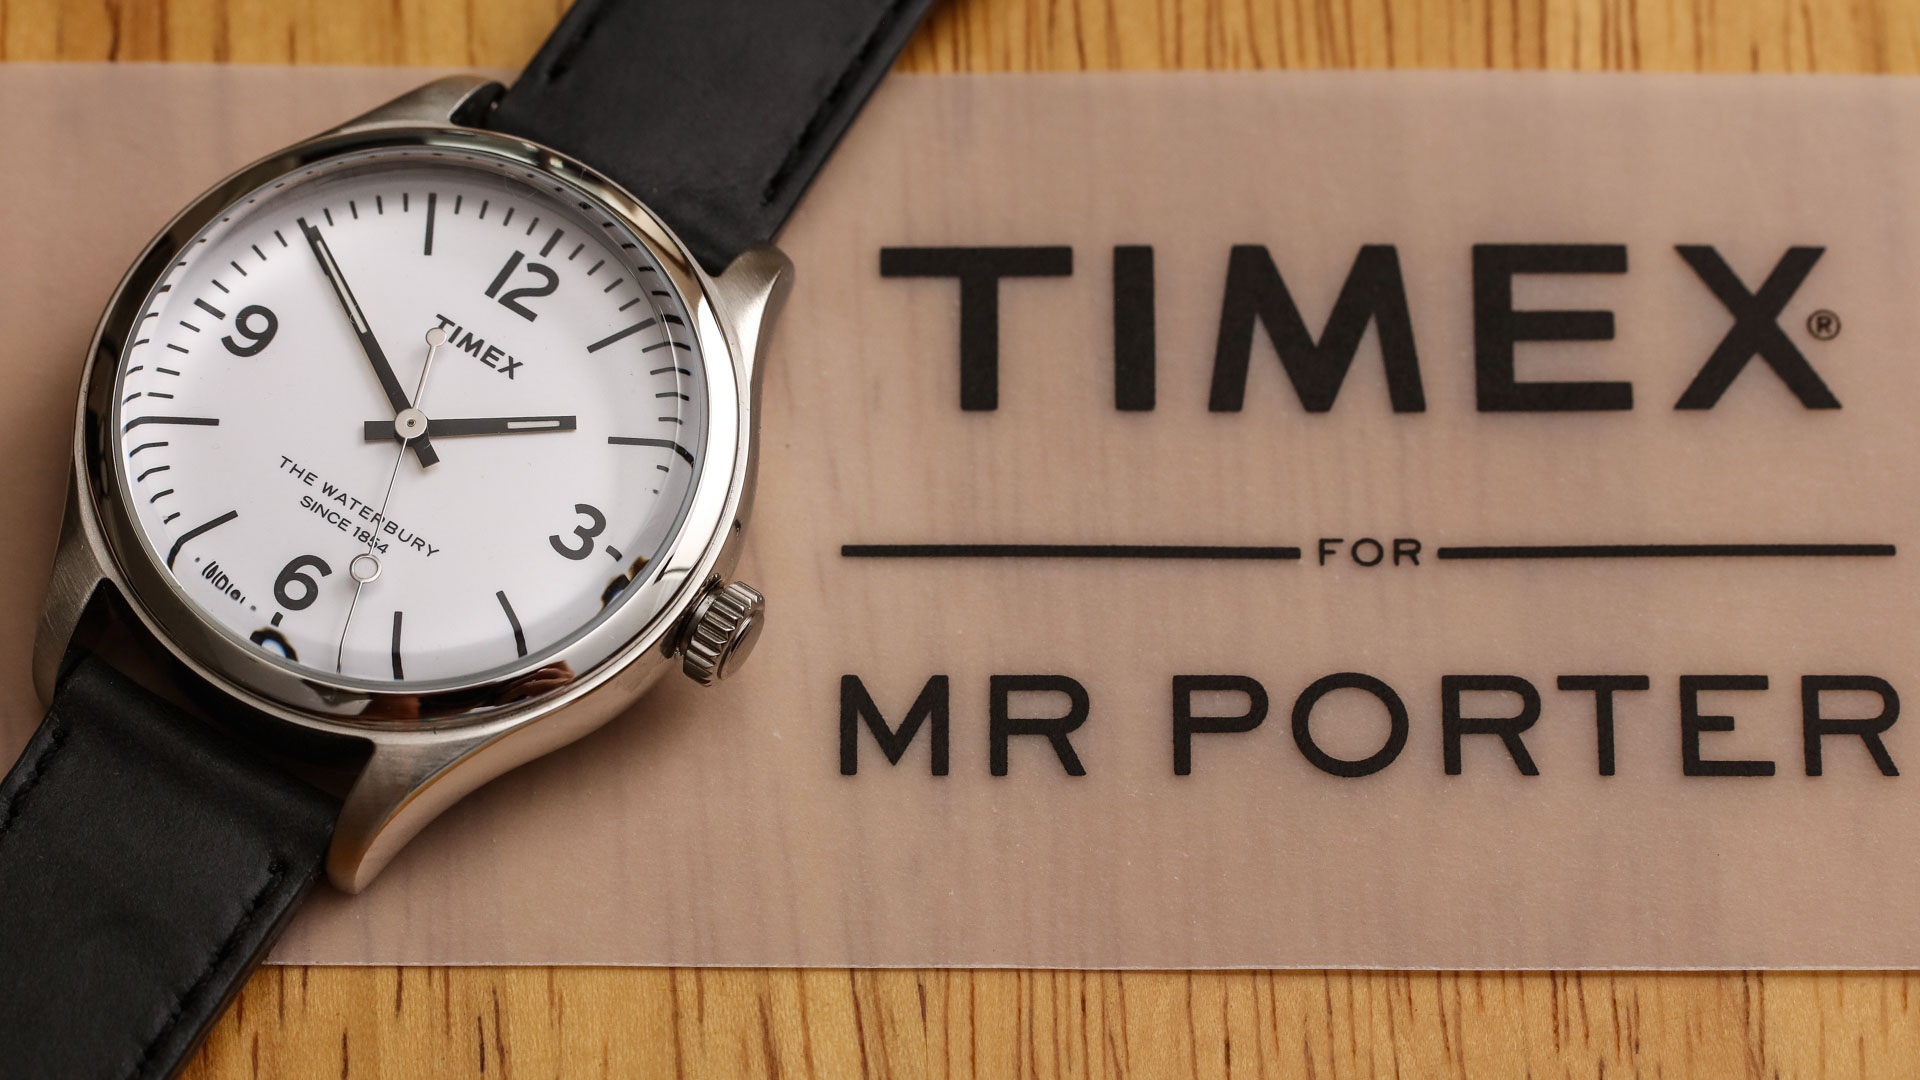 Timex For Mr. Porter Waterbury 792915 Watch Hands-On